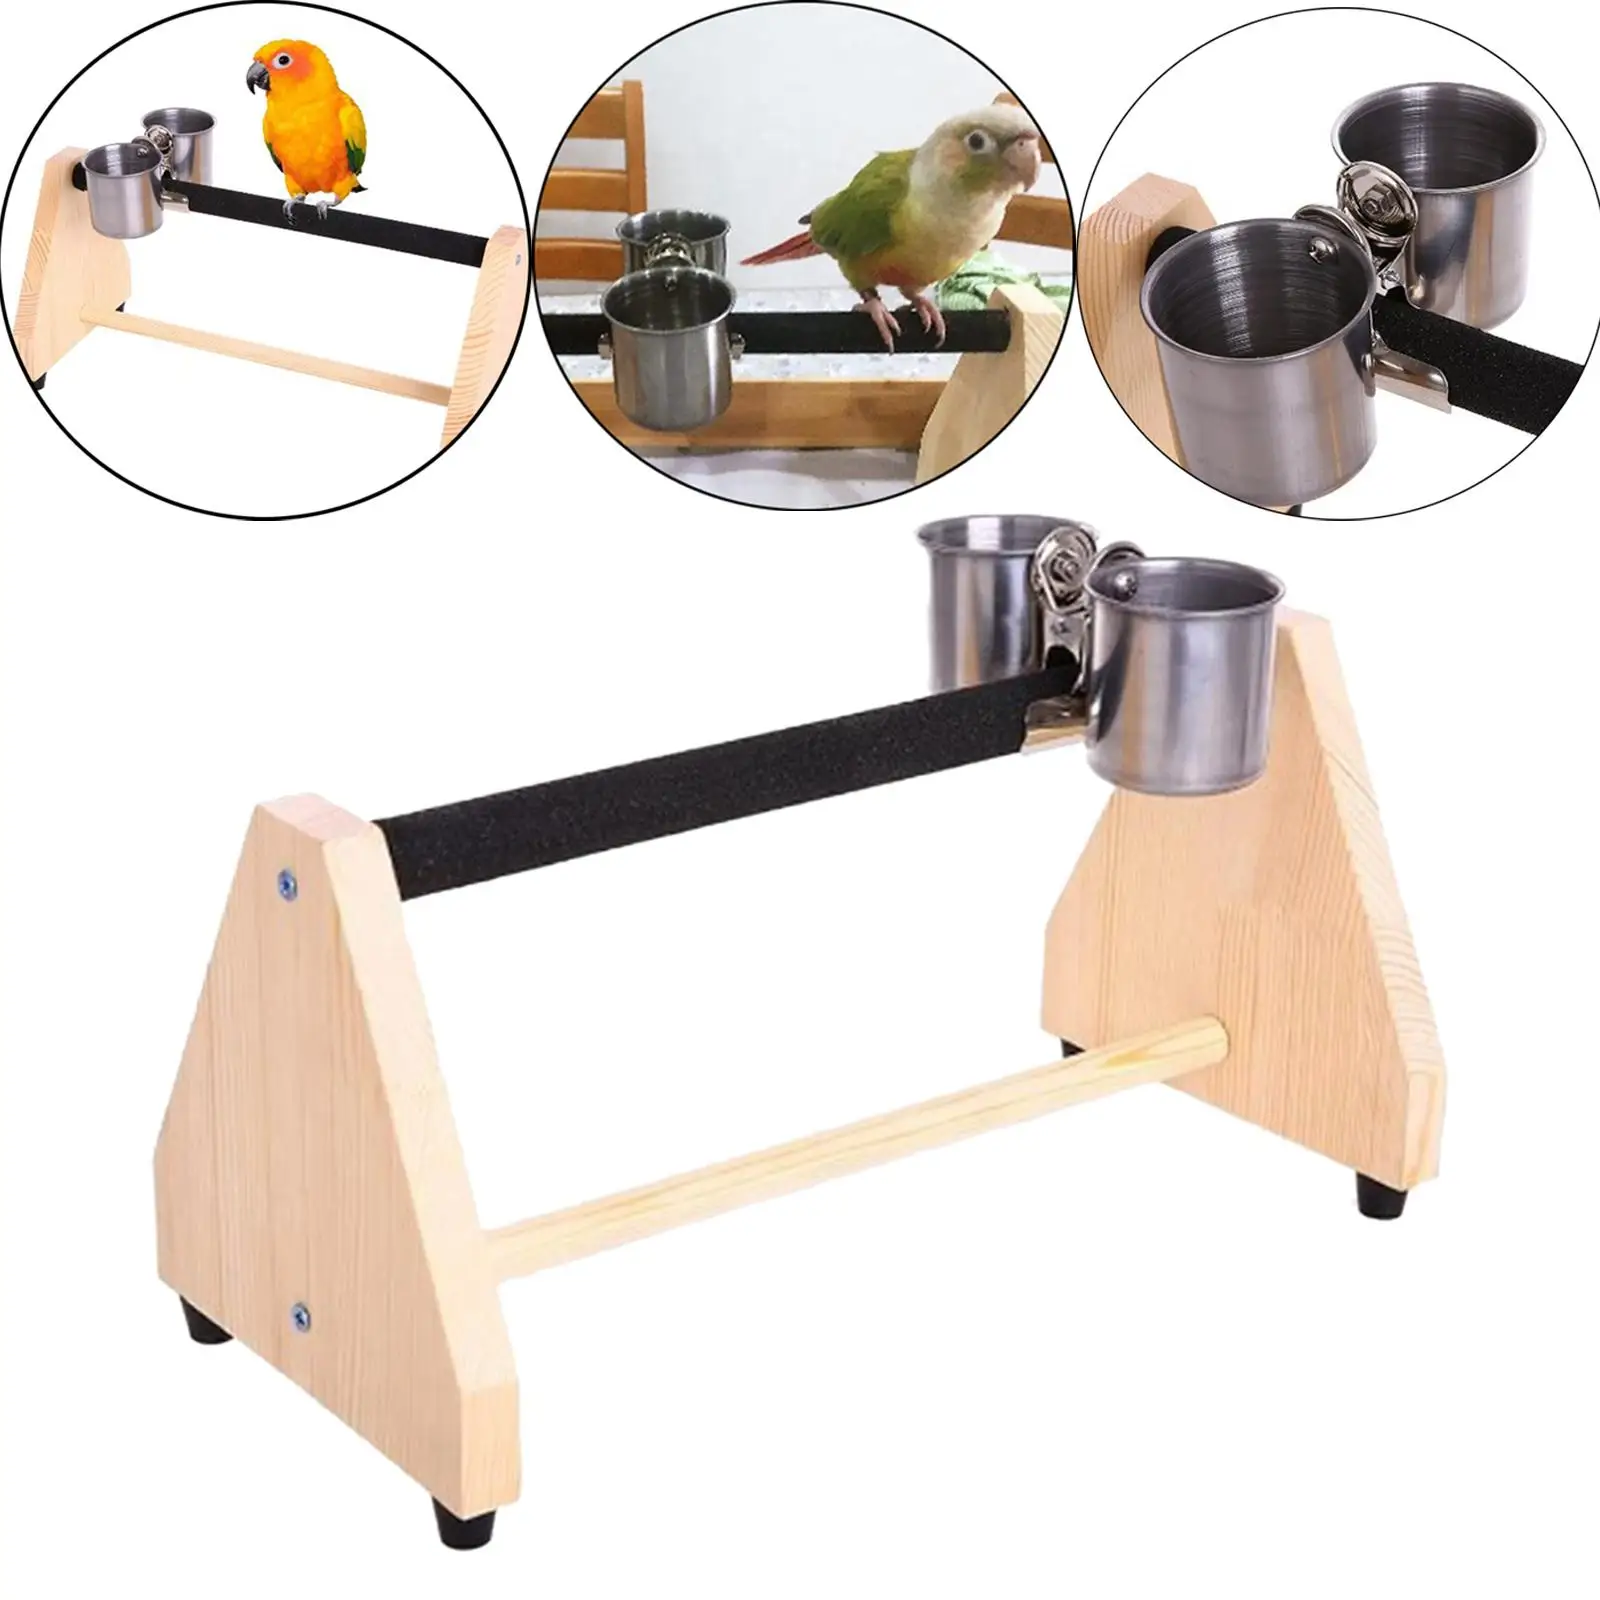 Pet Products Parrot Playstand Tabletop Bird Stand W/ Food Cup for Large Bird